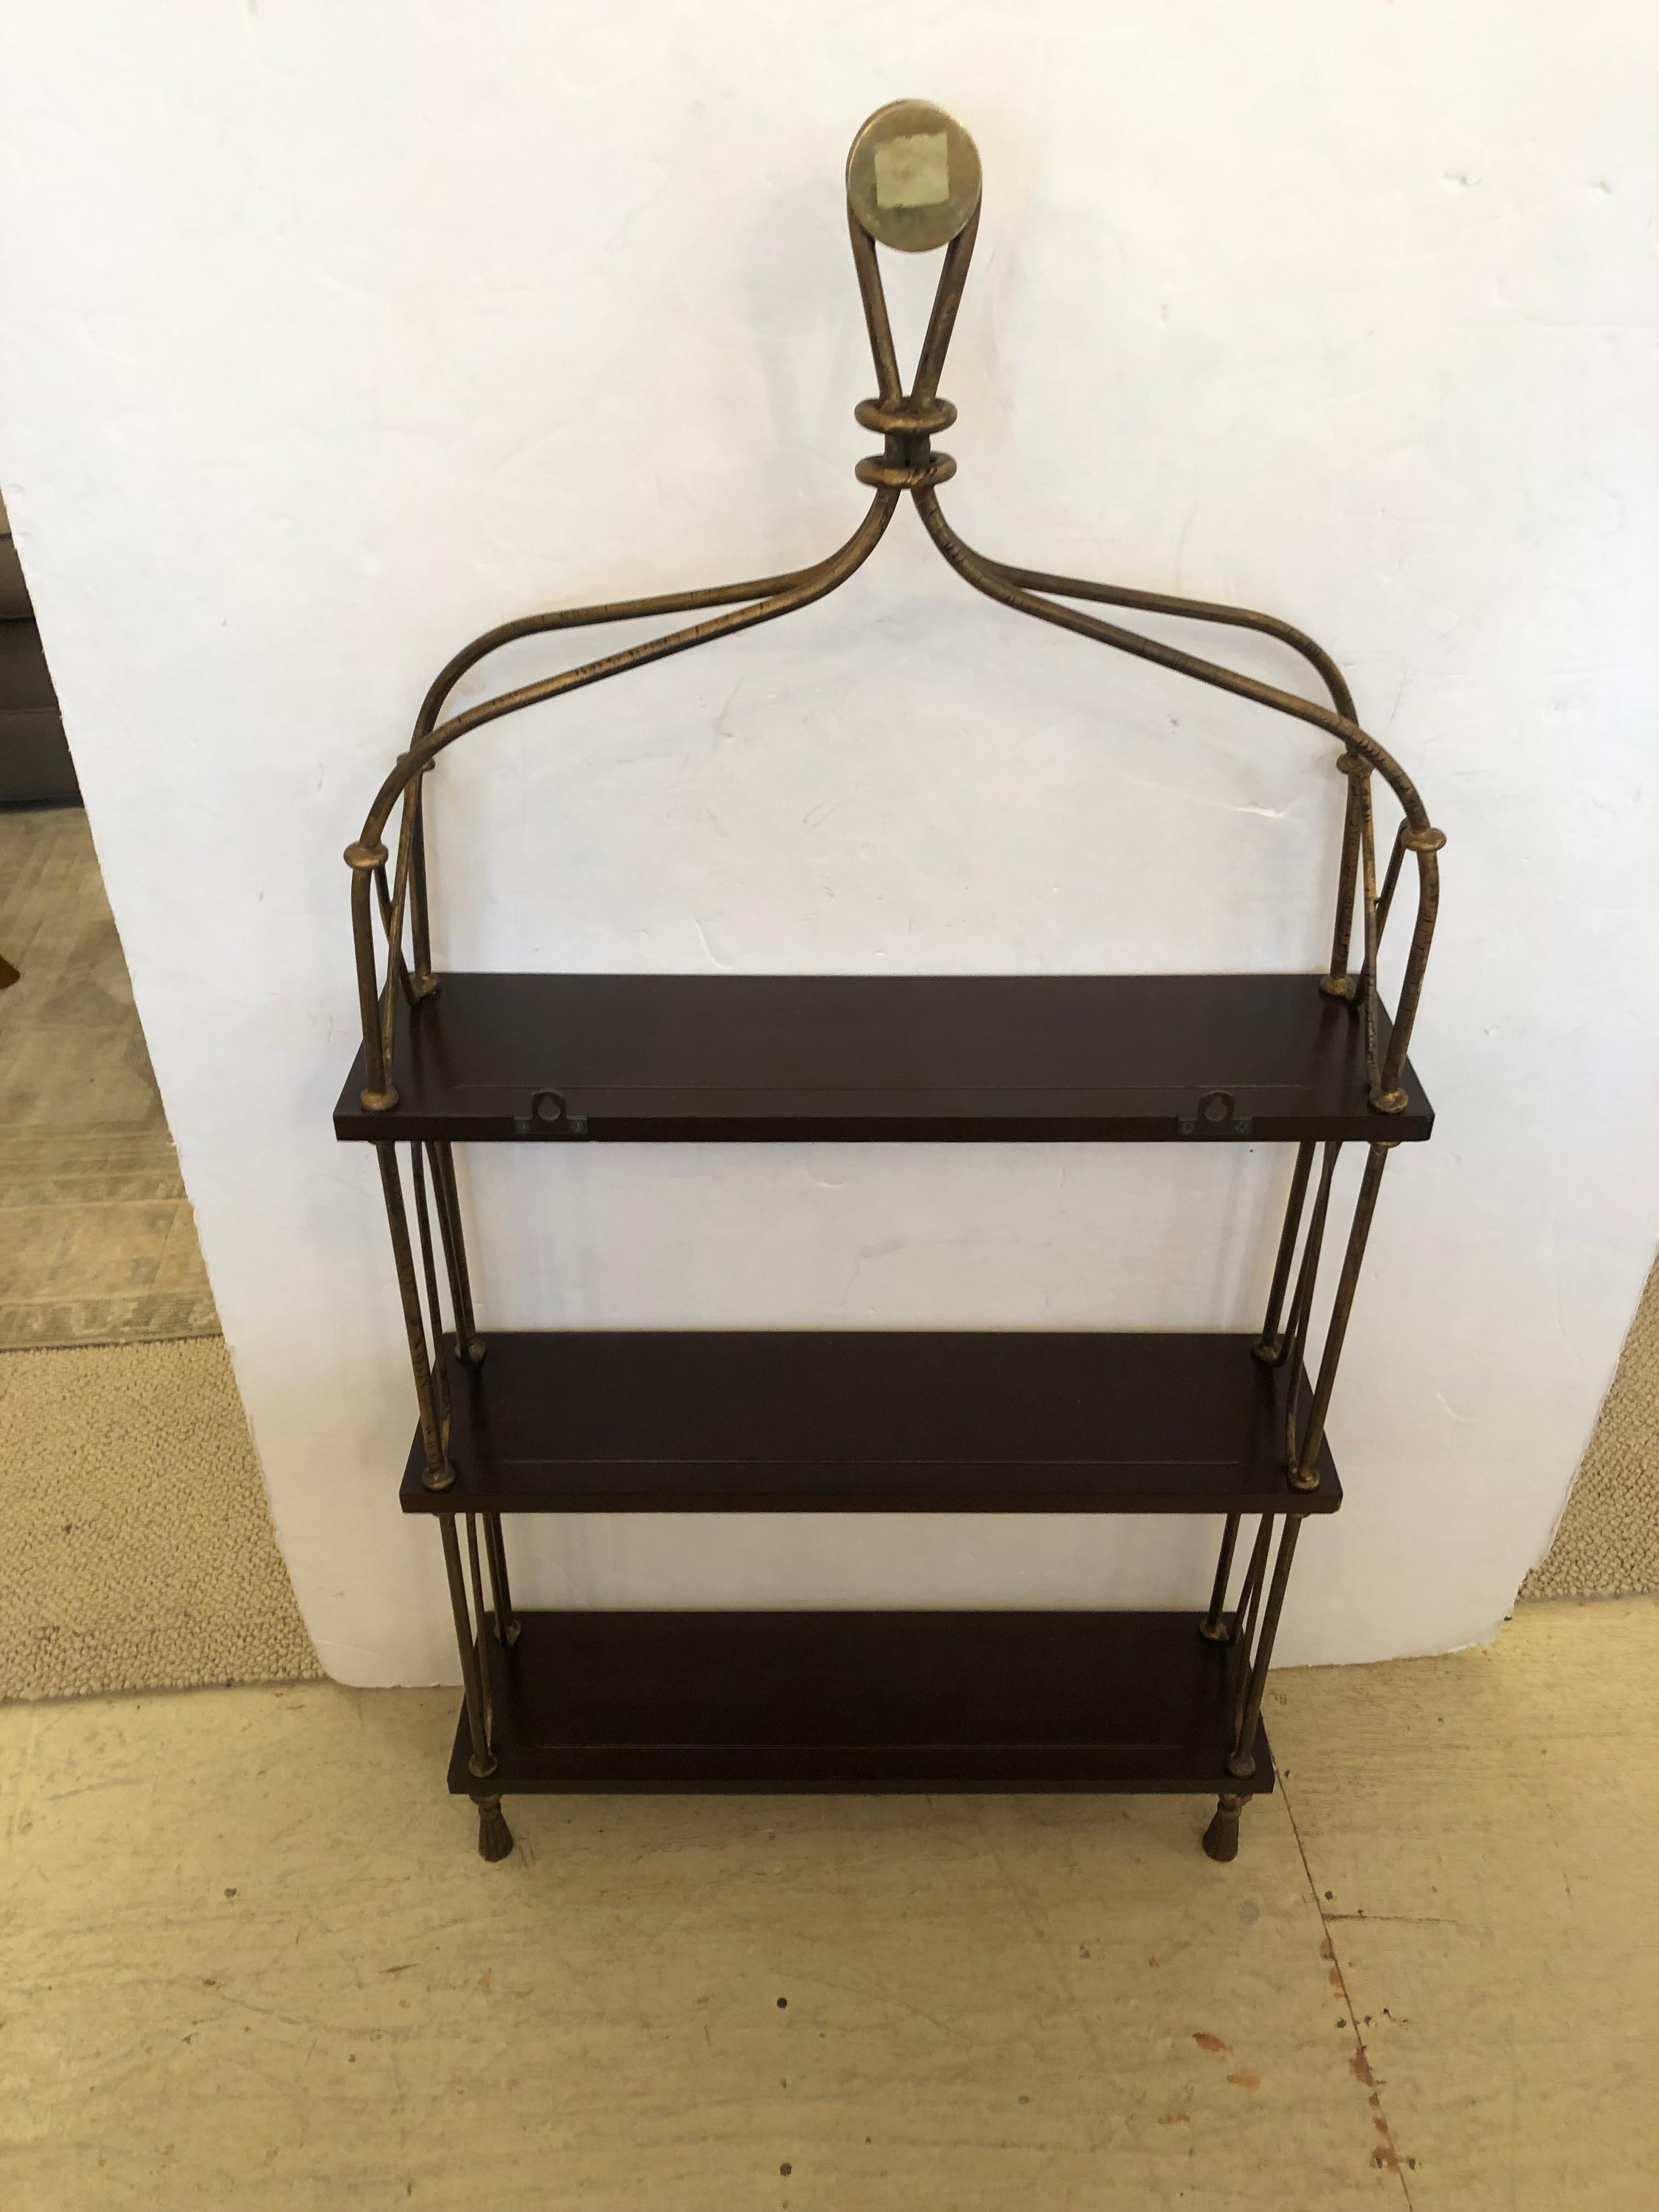 Handsome 3 Tier Hanging or Free Standing Etagere Shelves In Good Condition For Sale In Hopewell, NJ